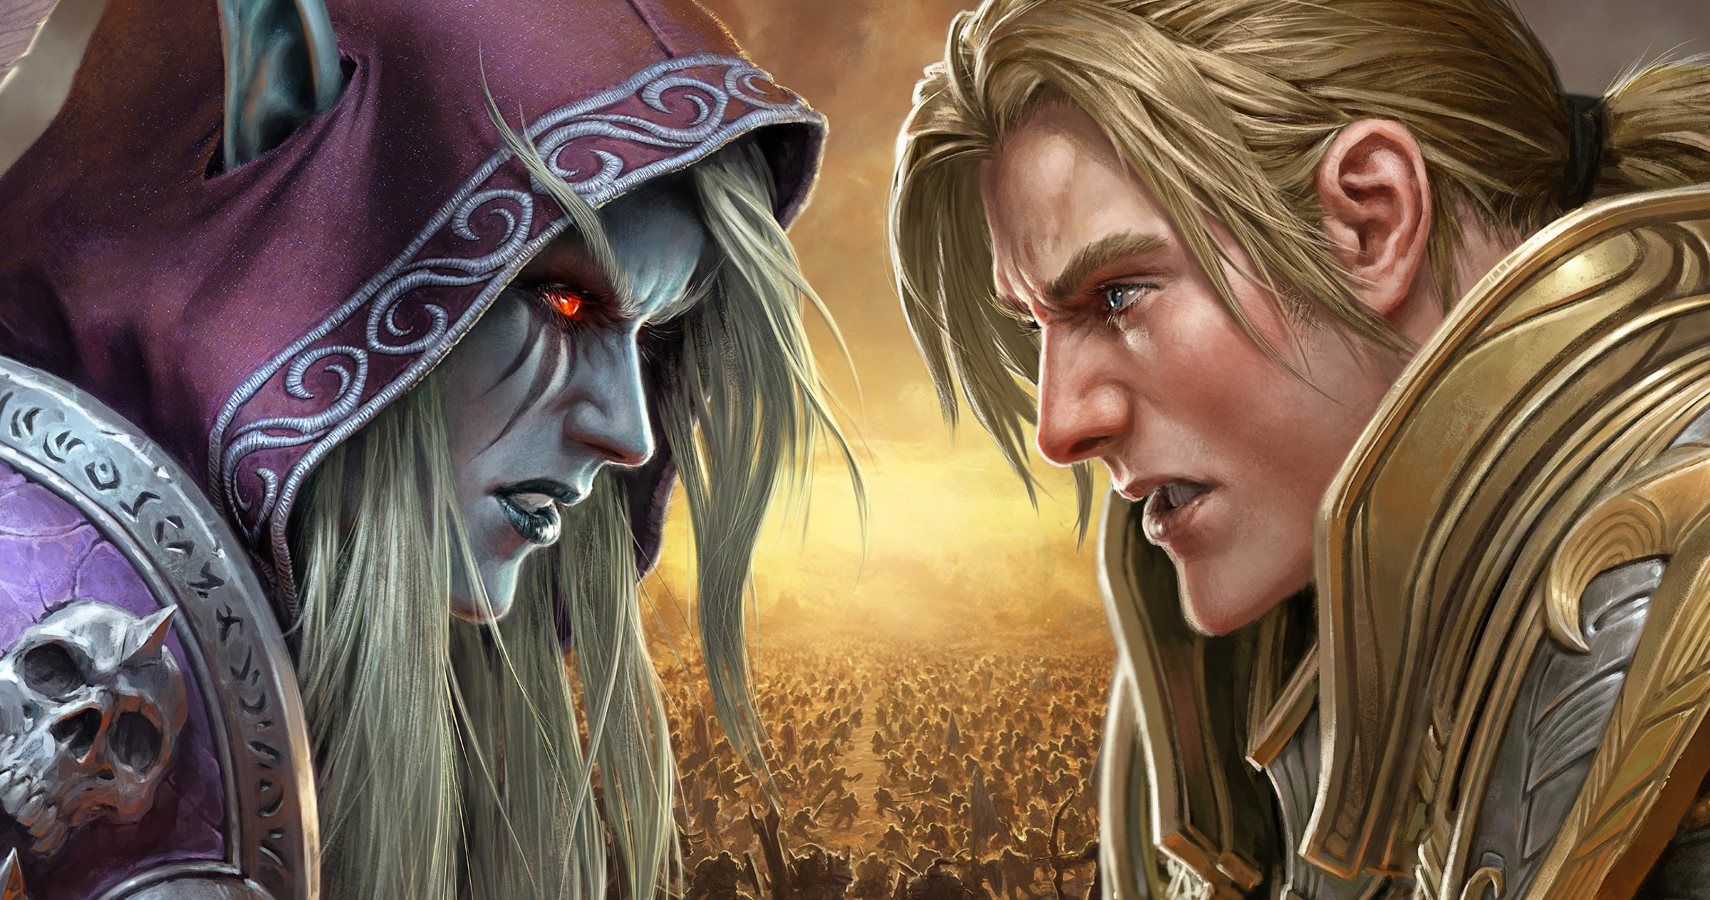 World Of Warcraft Player Hits The New Level Cap Just Four Hours After Expansion's Release